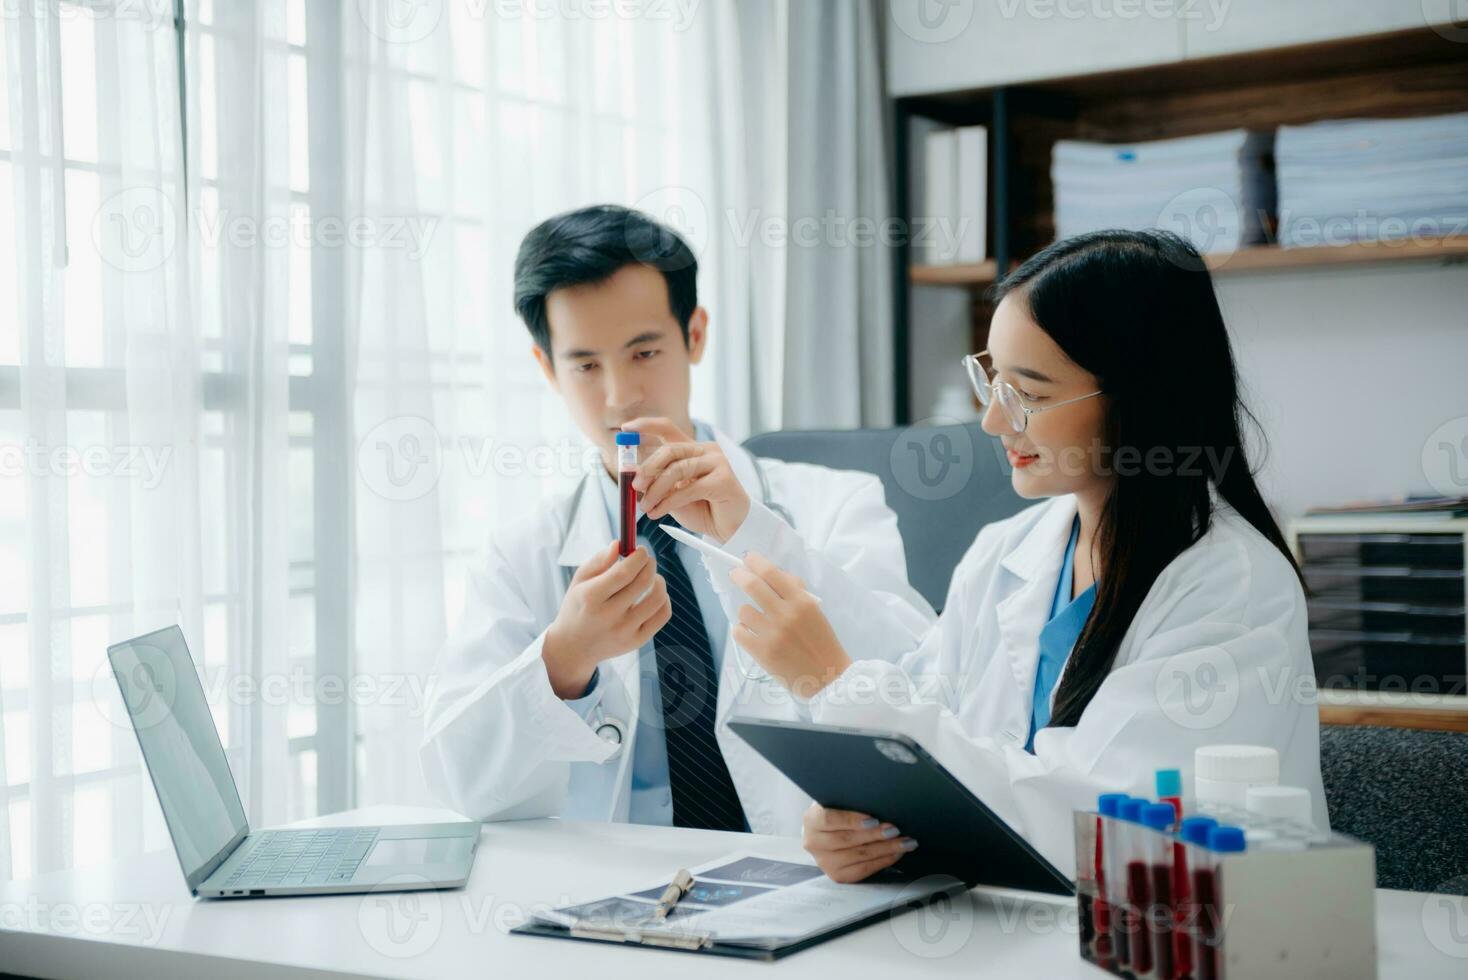 Portrait of Asian doctor speaking to colleagues during medical meeting in conference room or Medical Laboratory photo